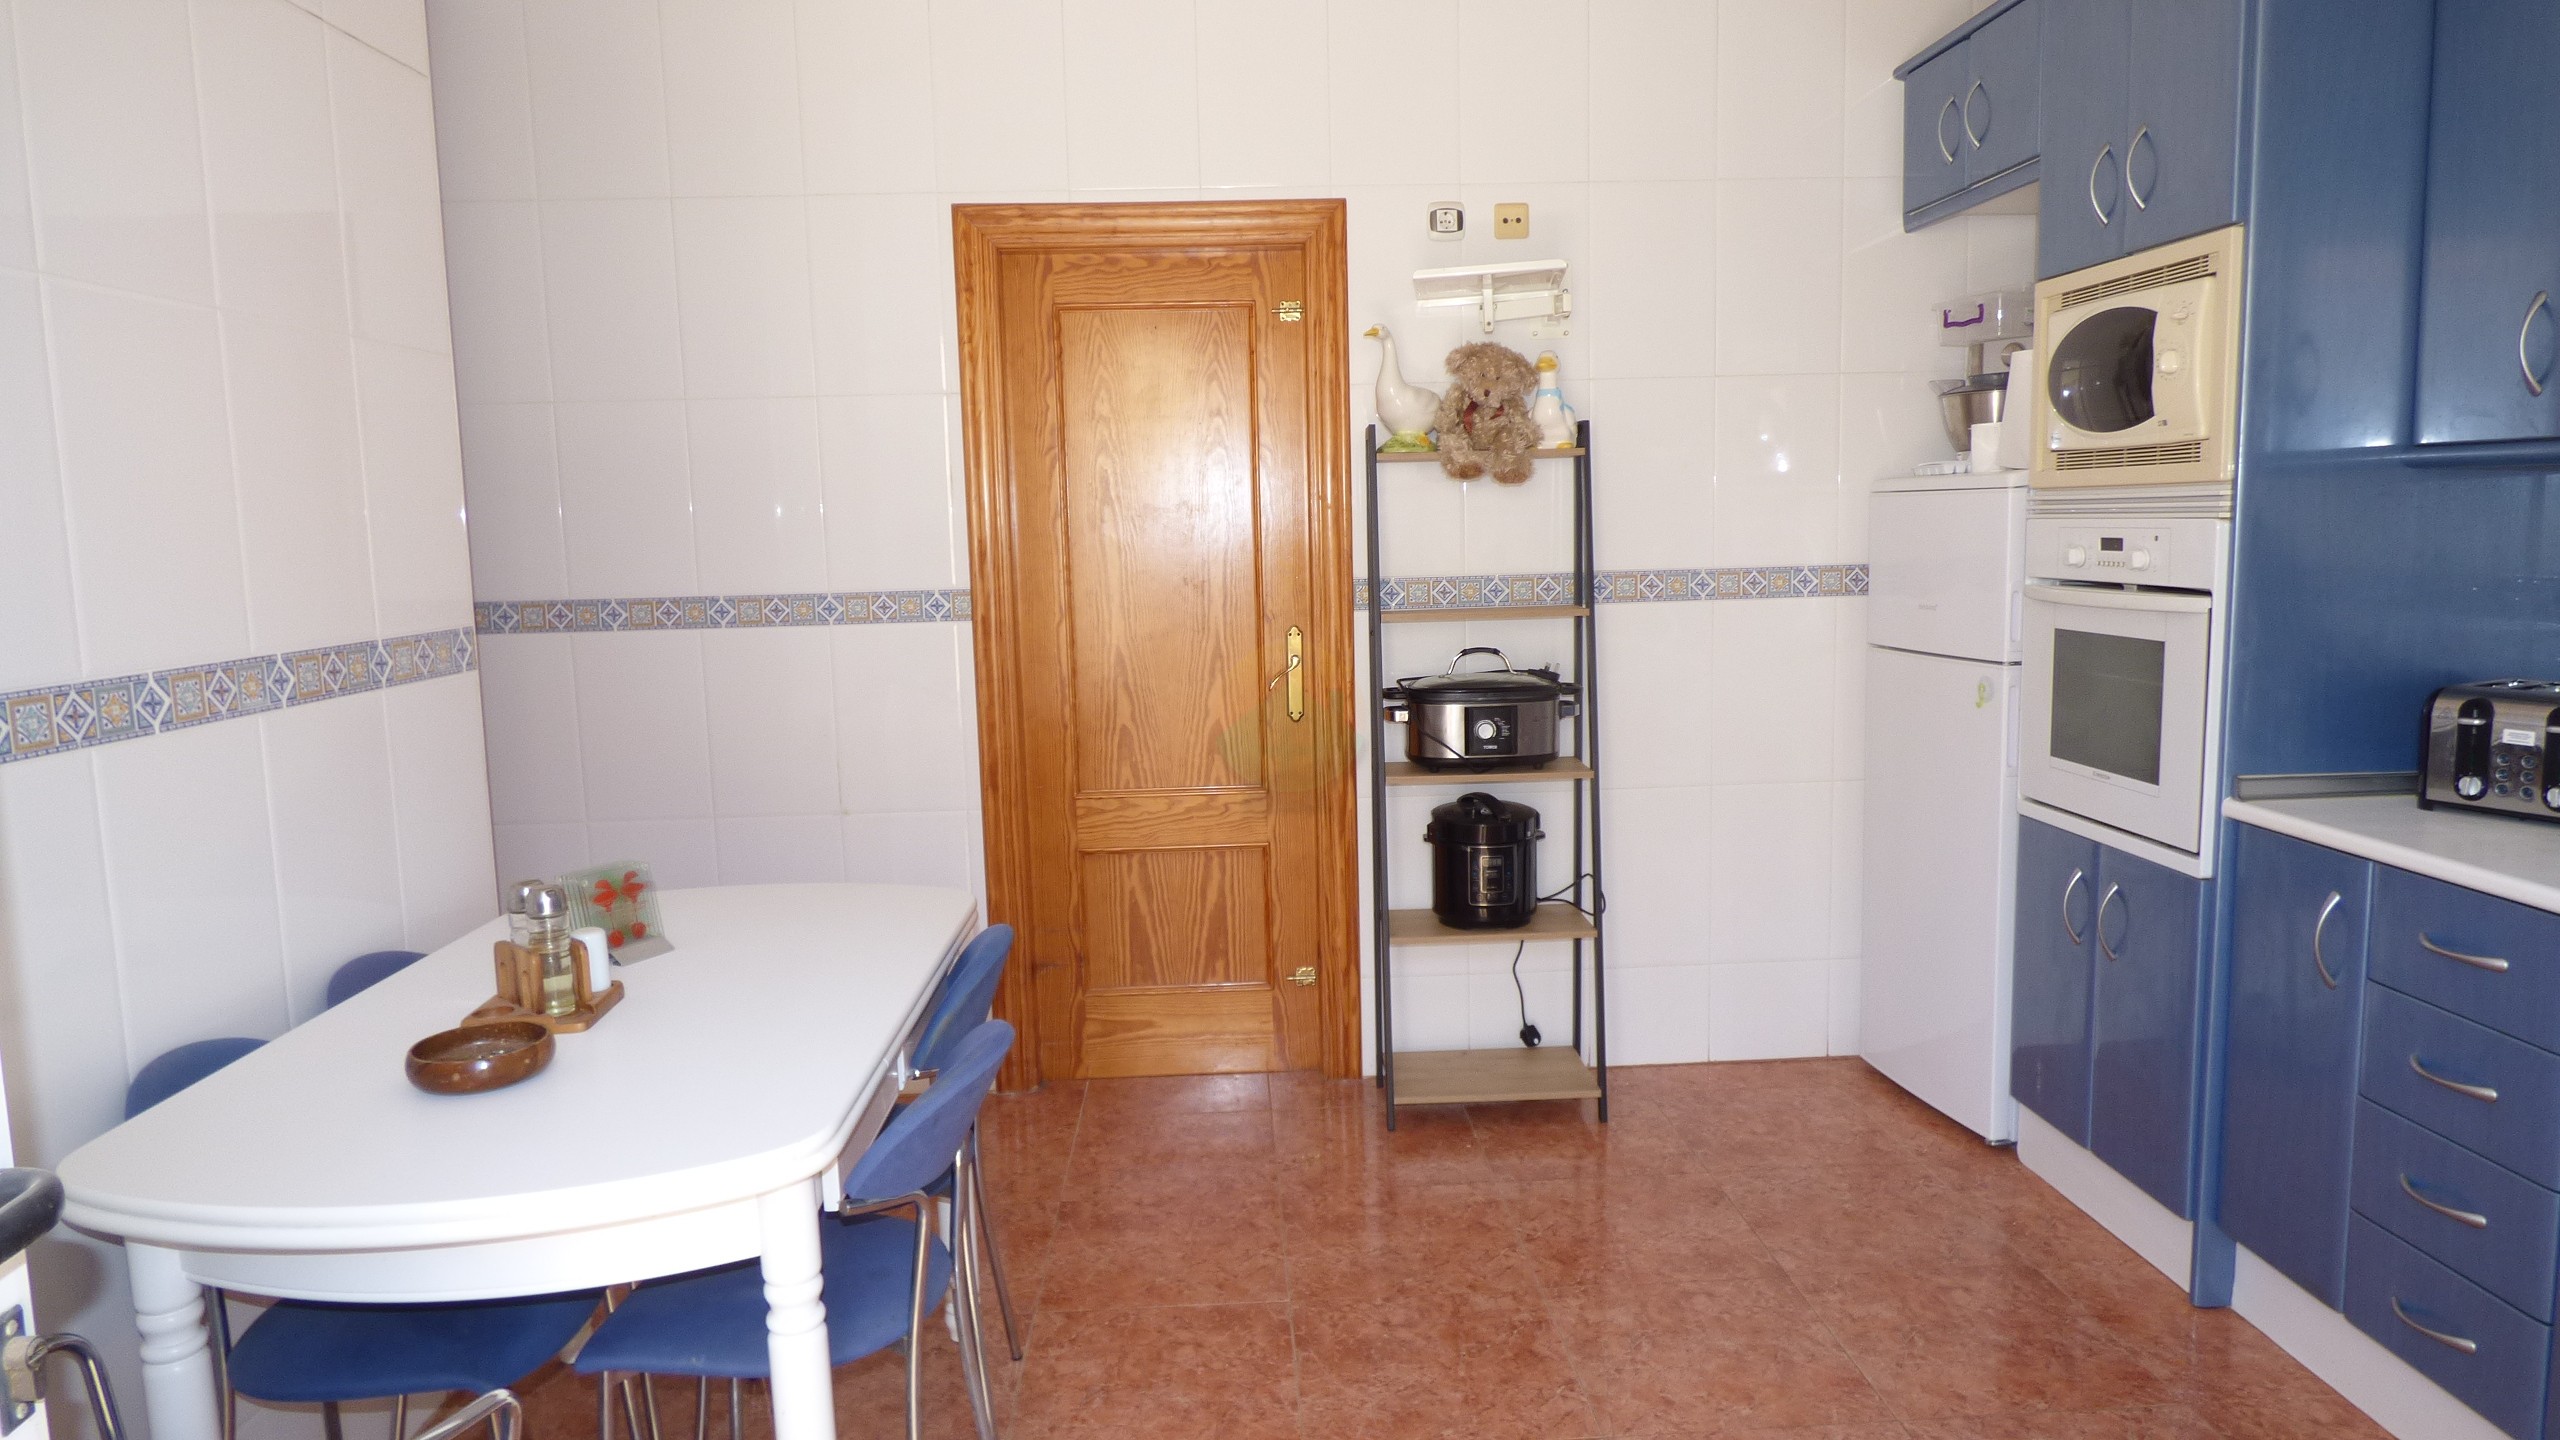 3 Bedroom Semi - Detached House For Sale